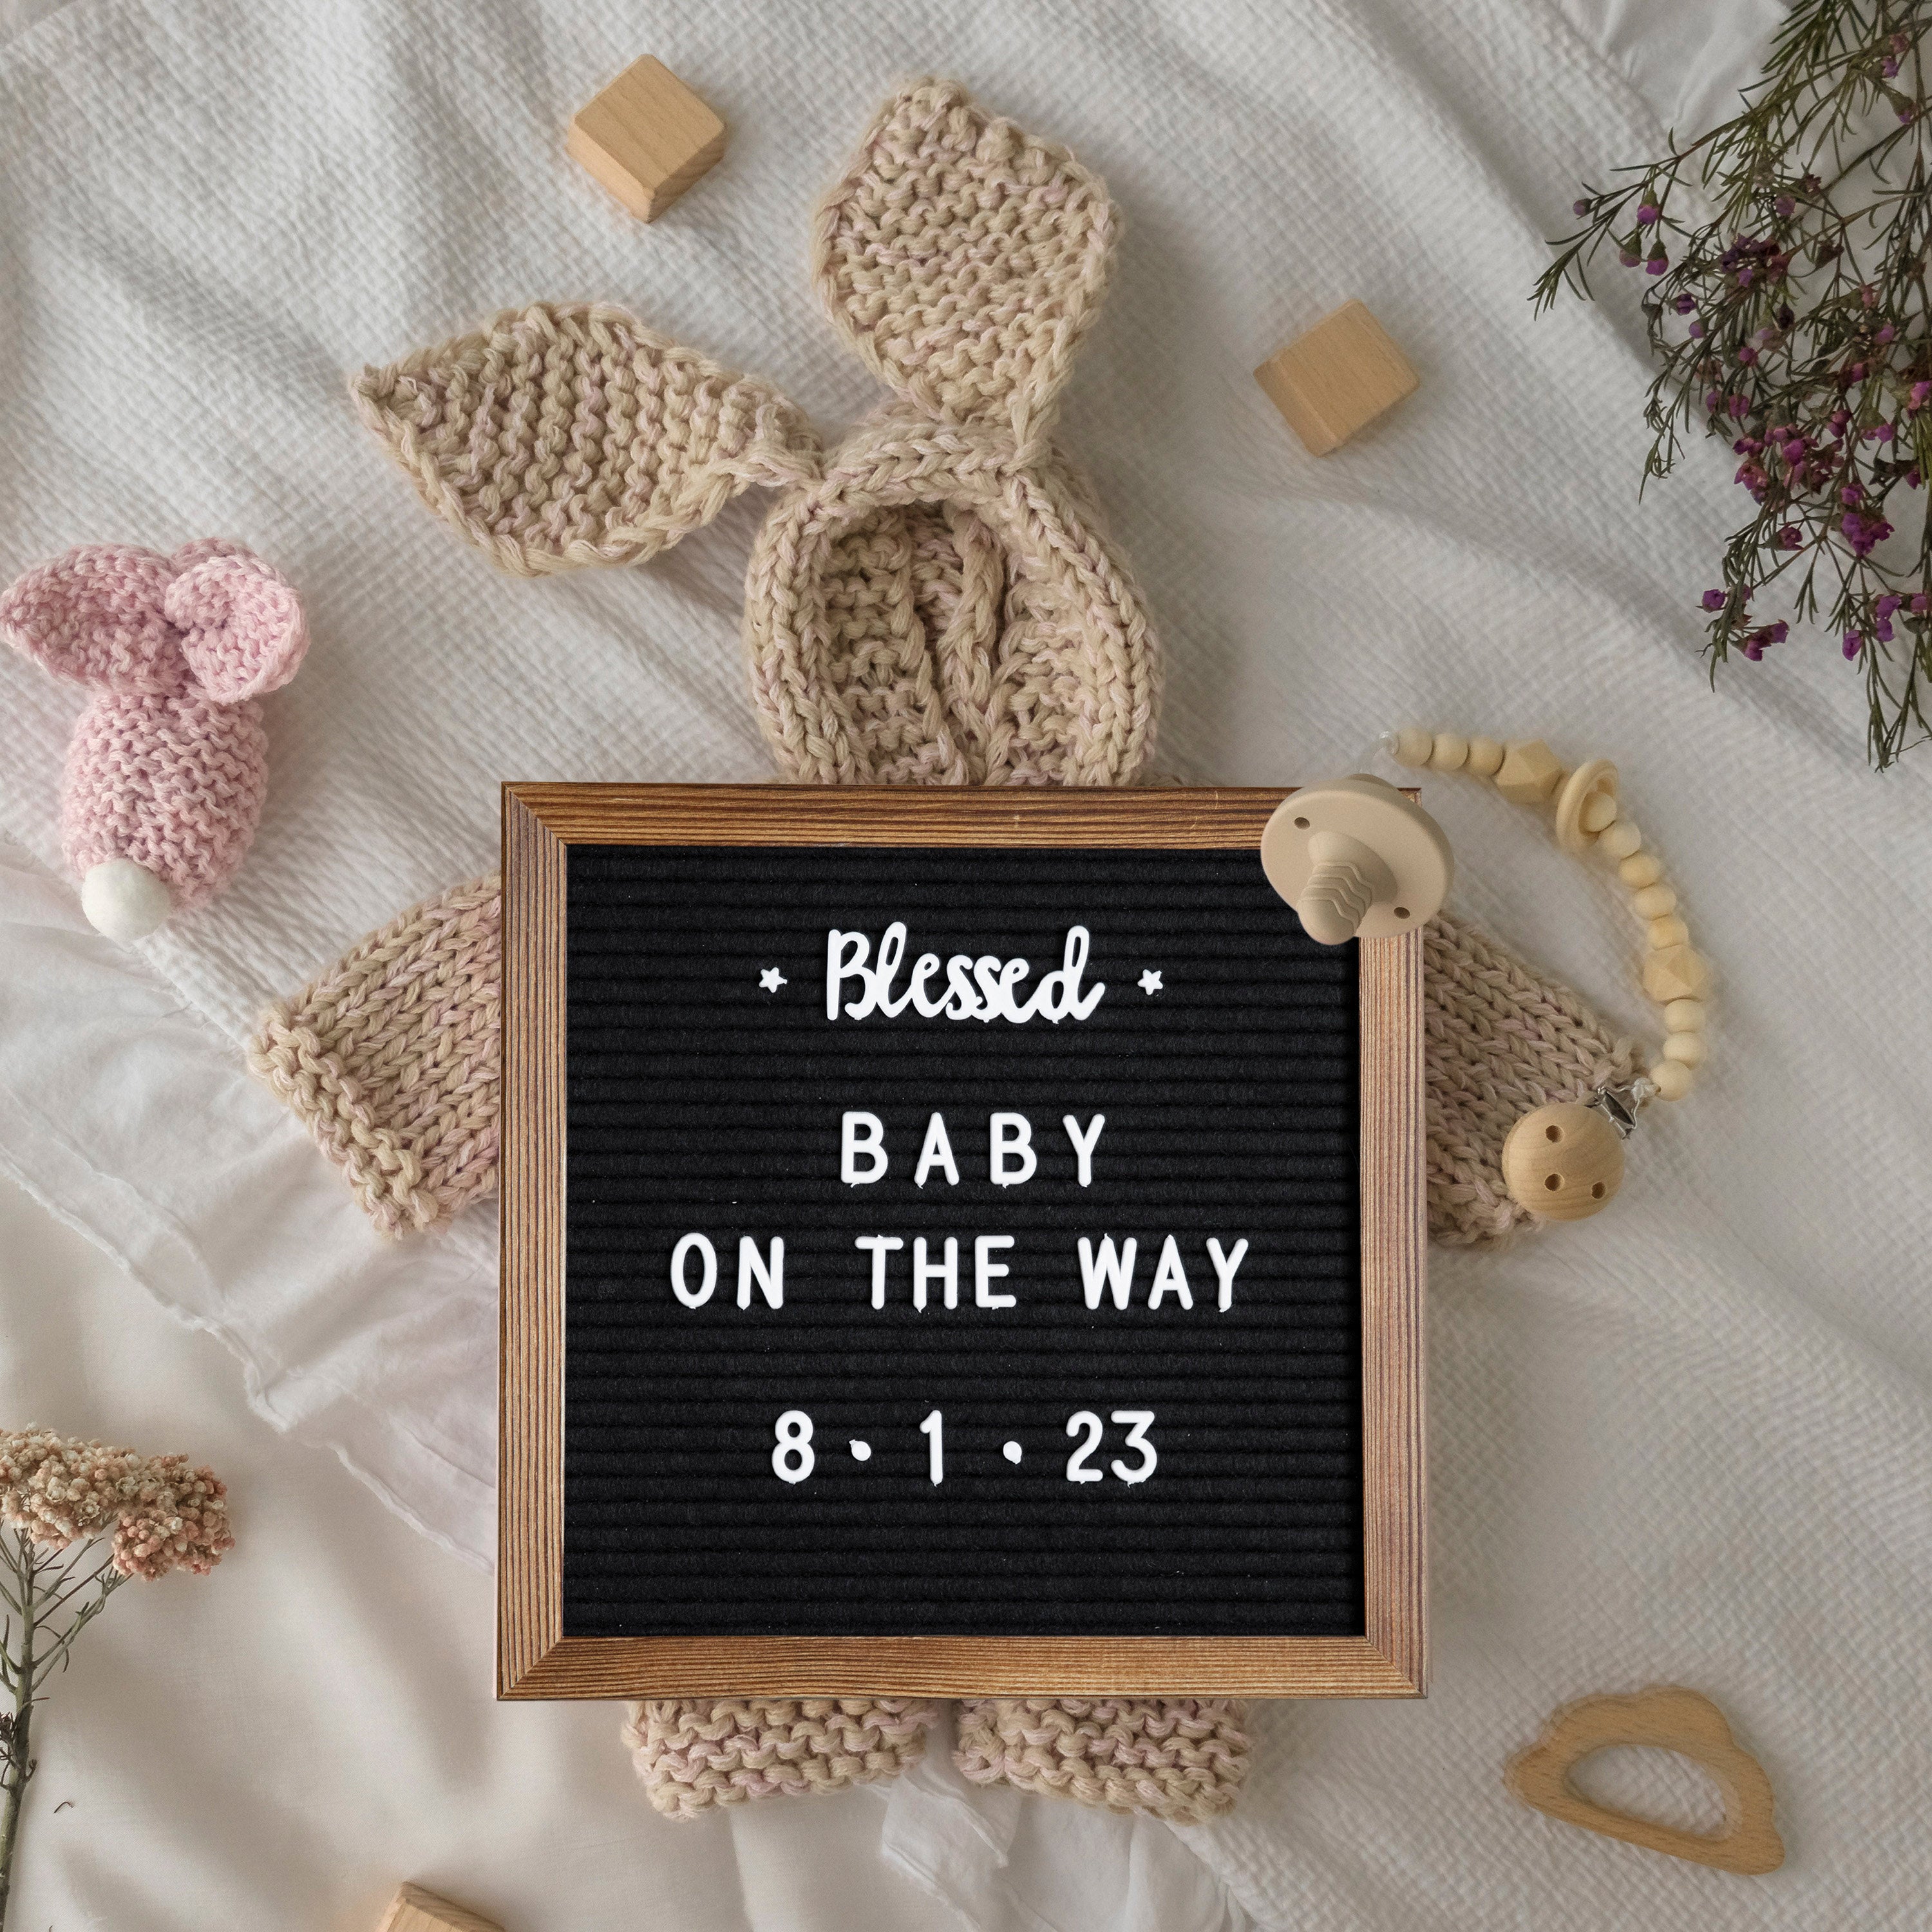 Gracie Felt Letter Board with Wooden Frame, 389 PP Letters Including Numbers, Symbols and Icons, Canvas Carrying Case-Felt Letter Boards-Flash Furniture-Wall2Wall Furnishings